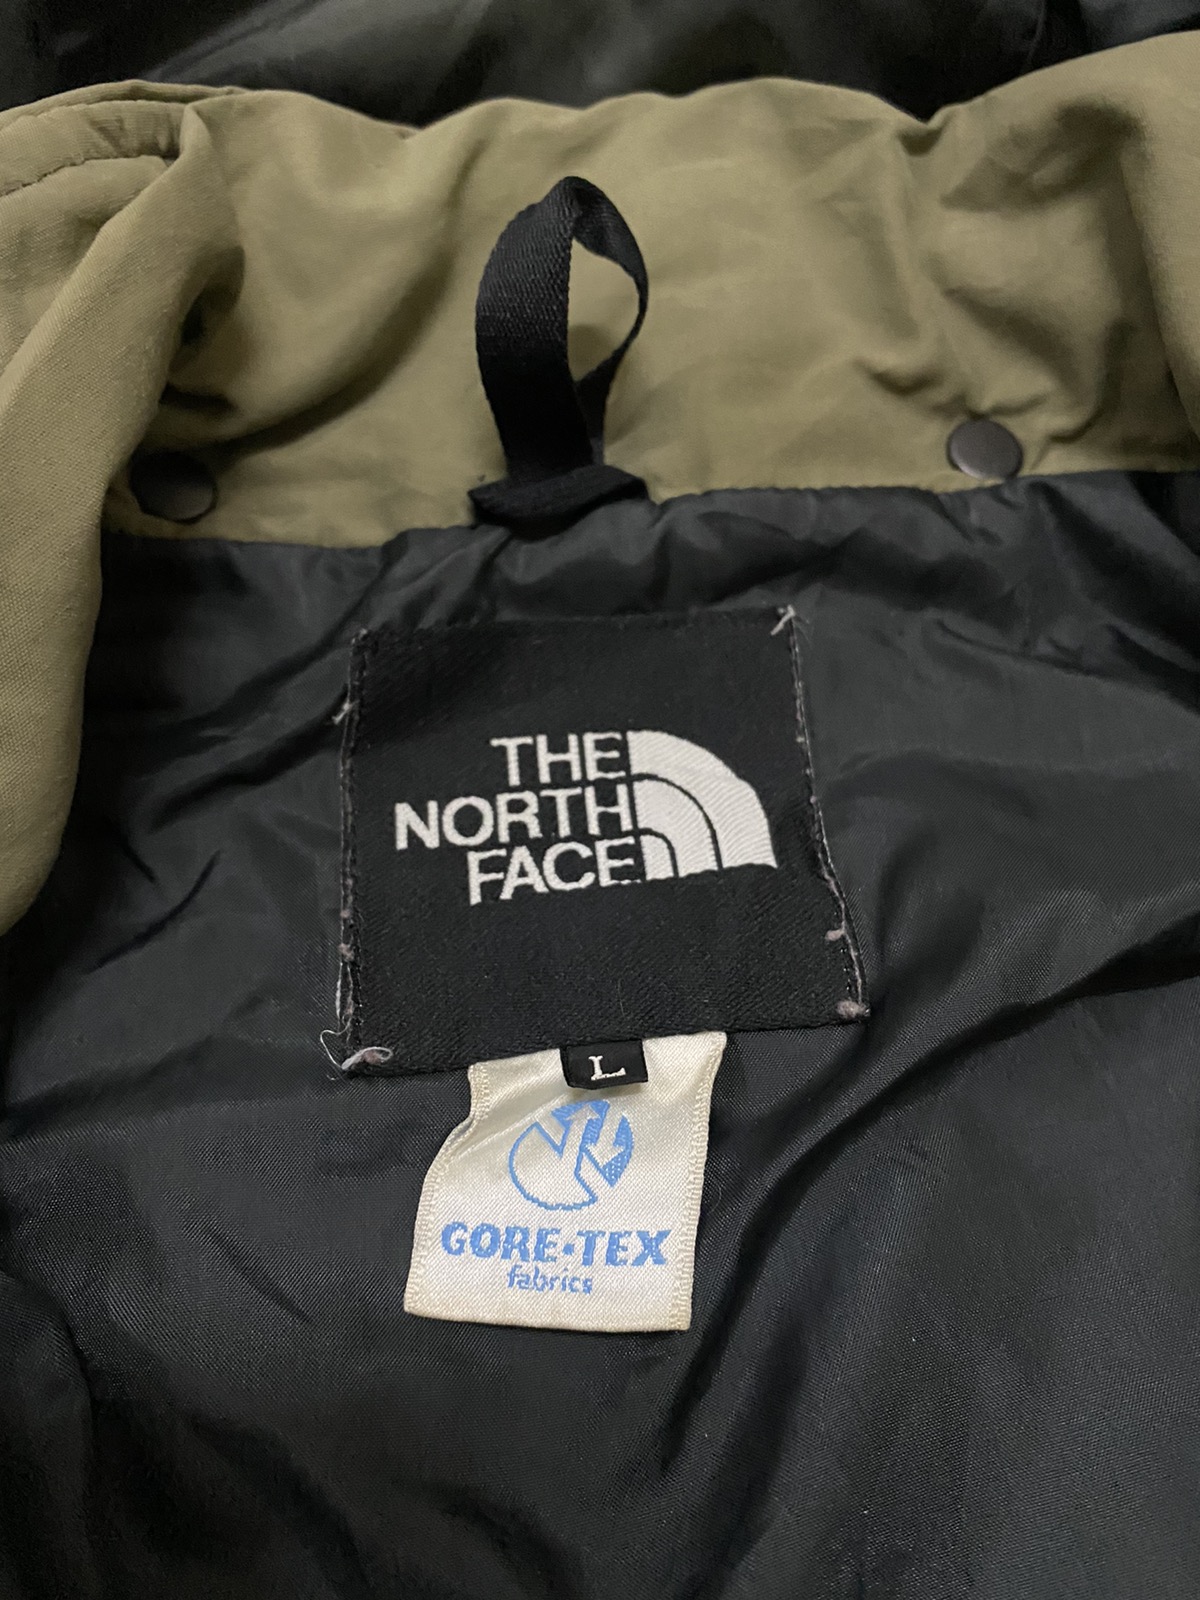 Vintage The North Face Parka Jacket Goretex With Hoodie - 3